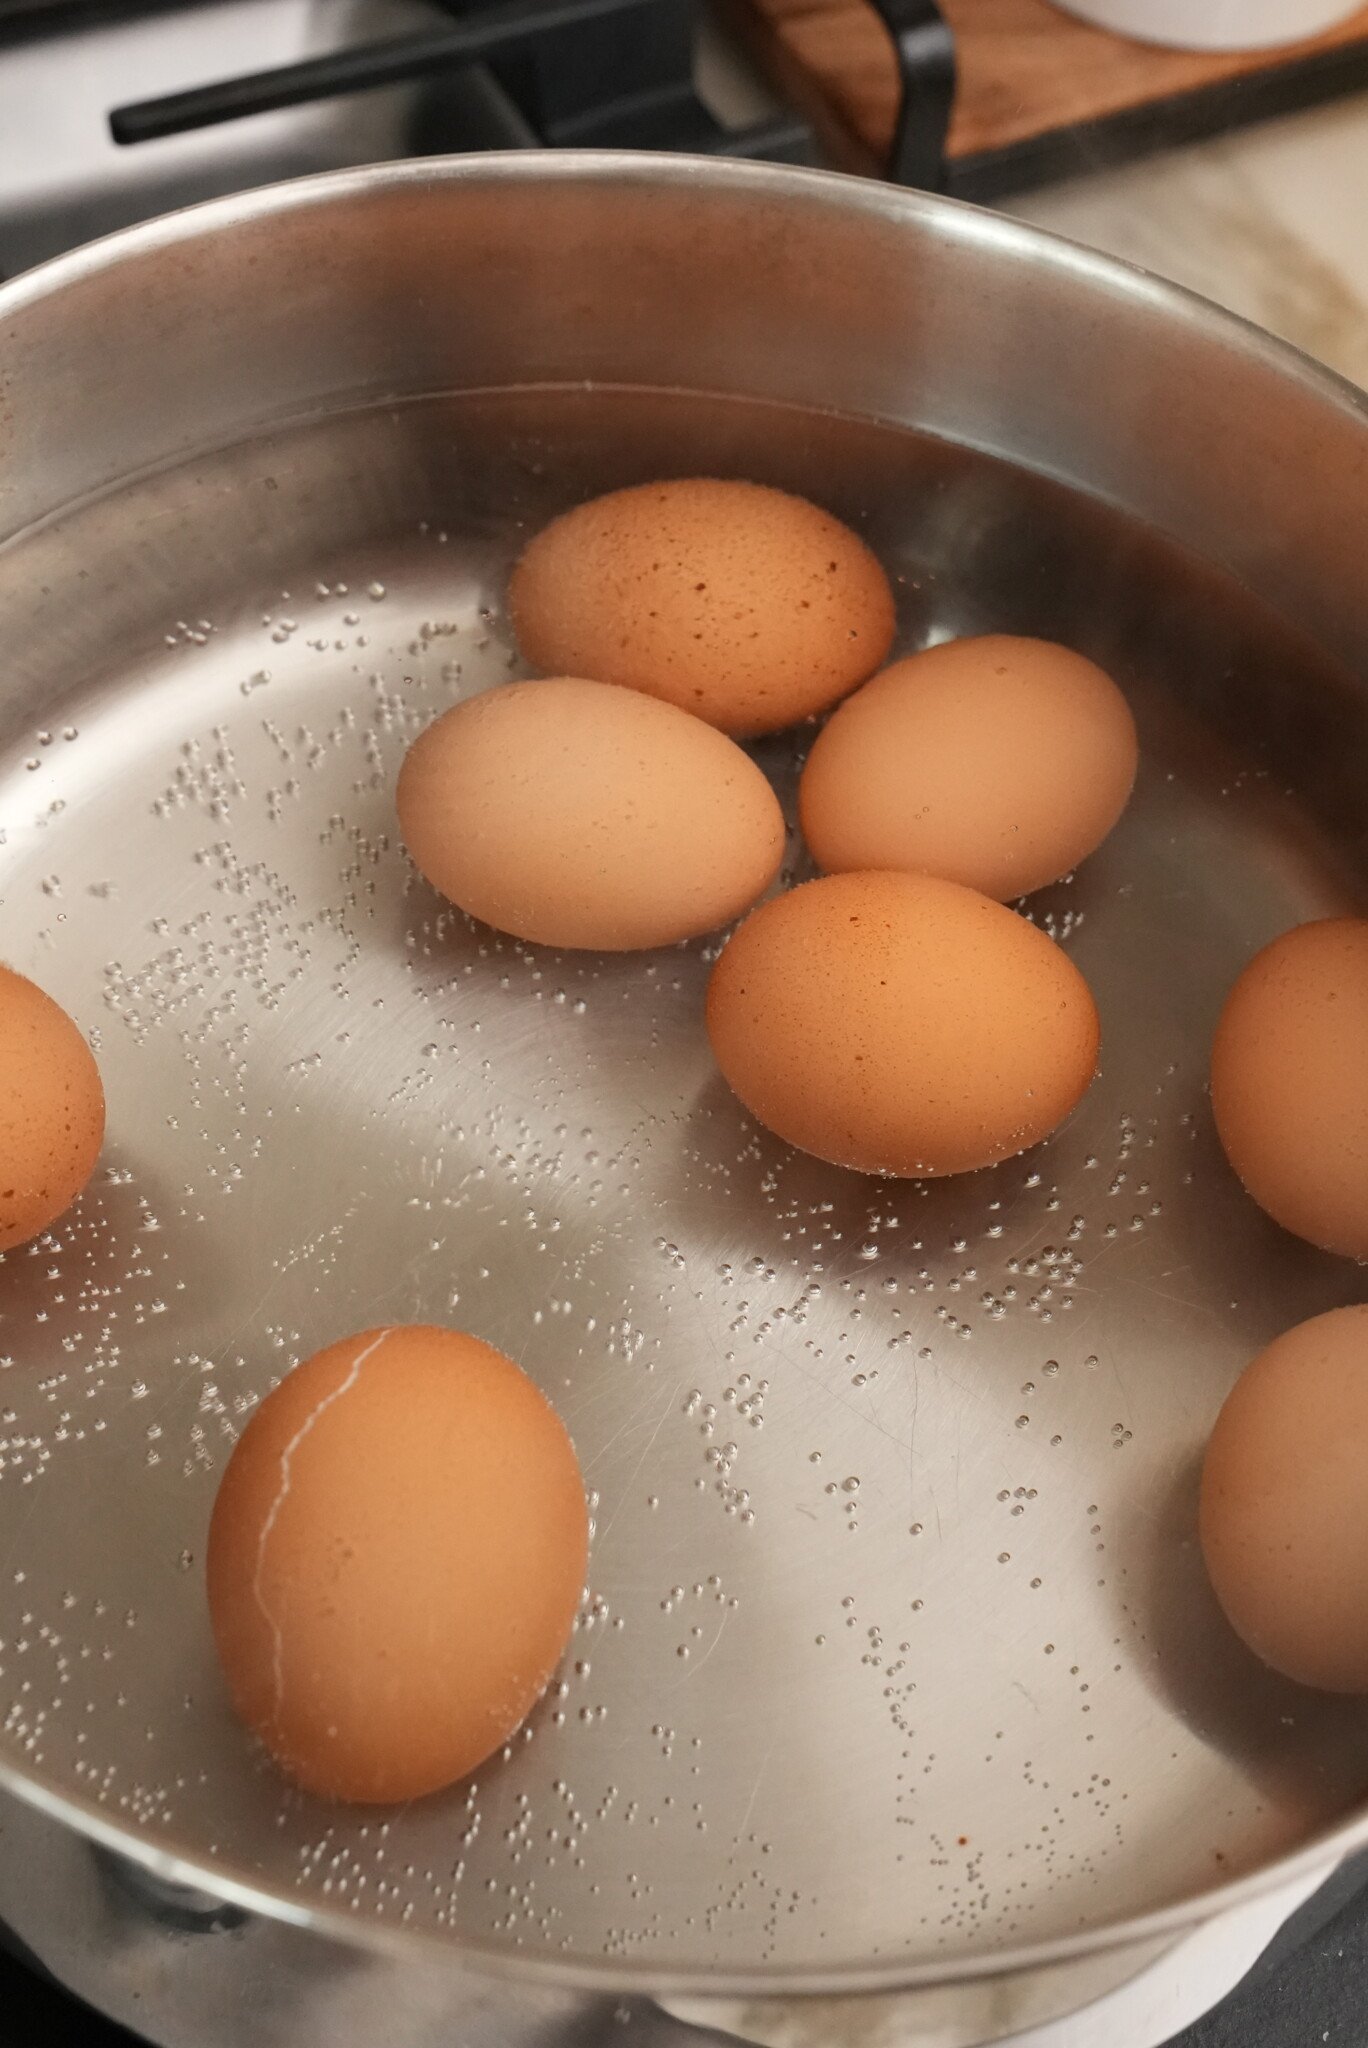 Eggs boiling in water.